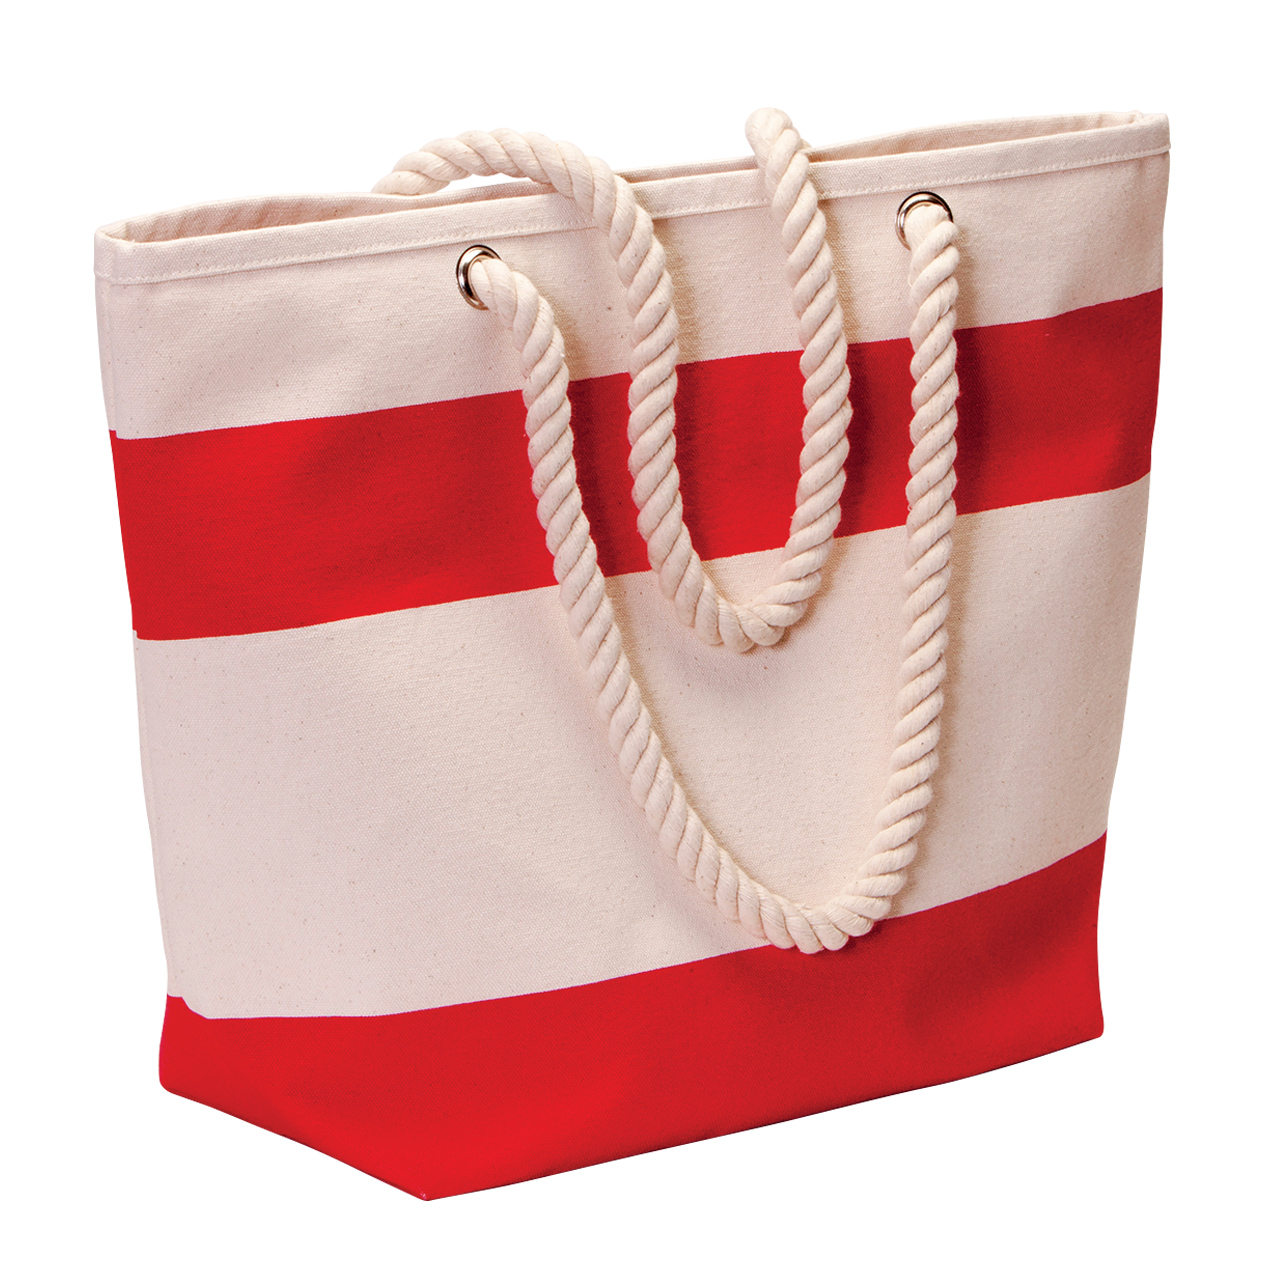 Promotional Sydney Cotton Canvas Tote Bags: Branded Online | Promotion ...